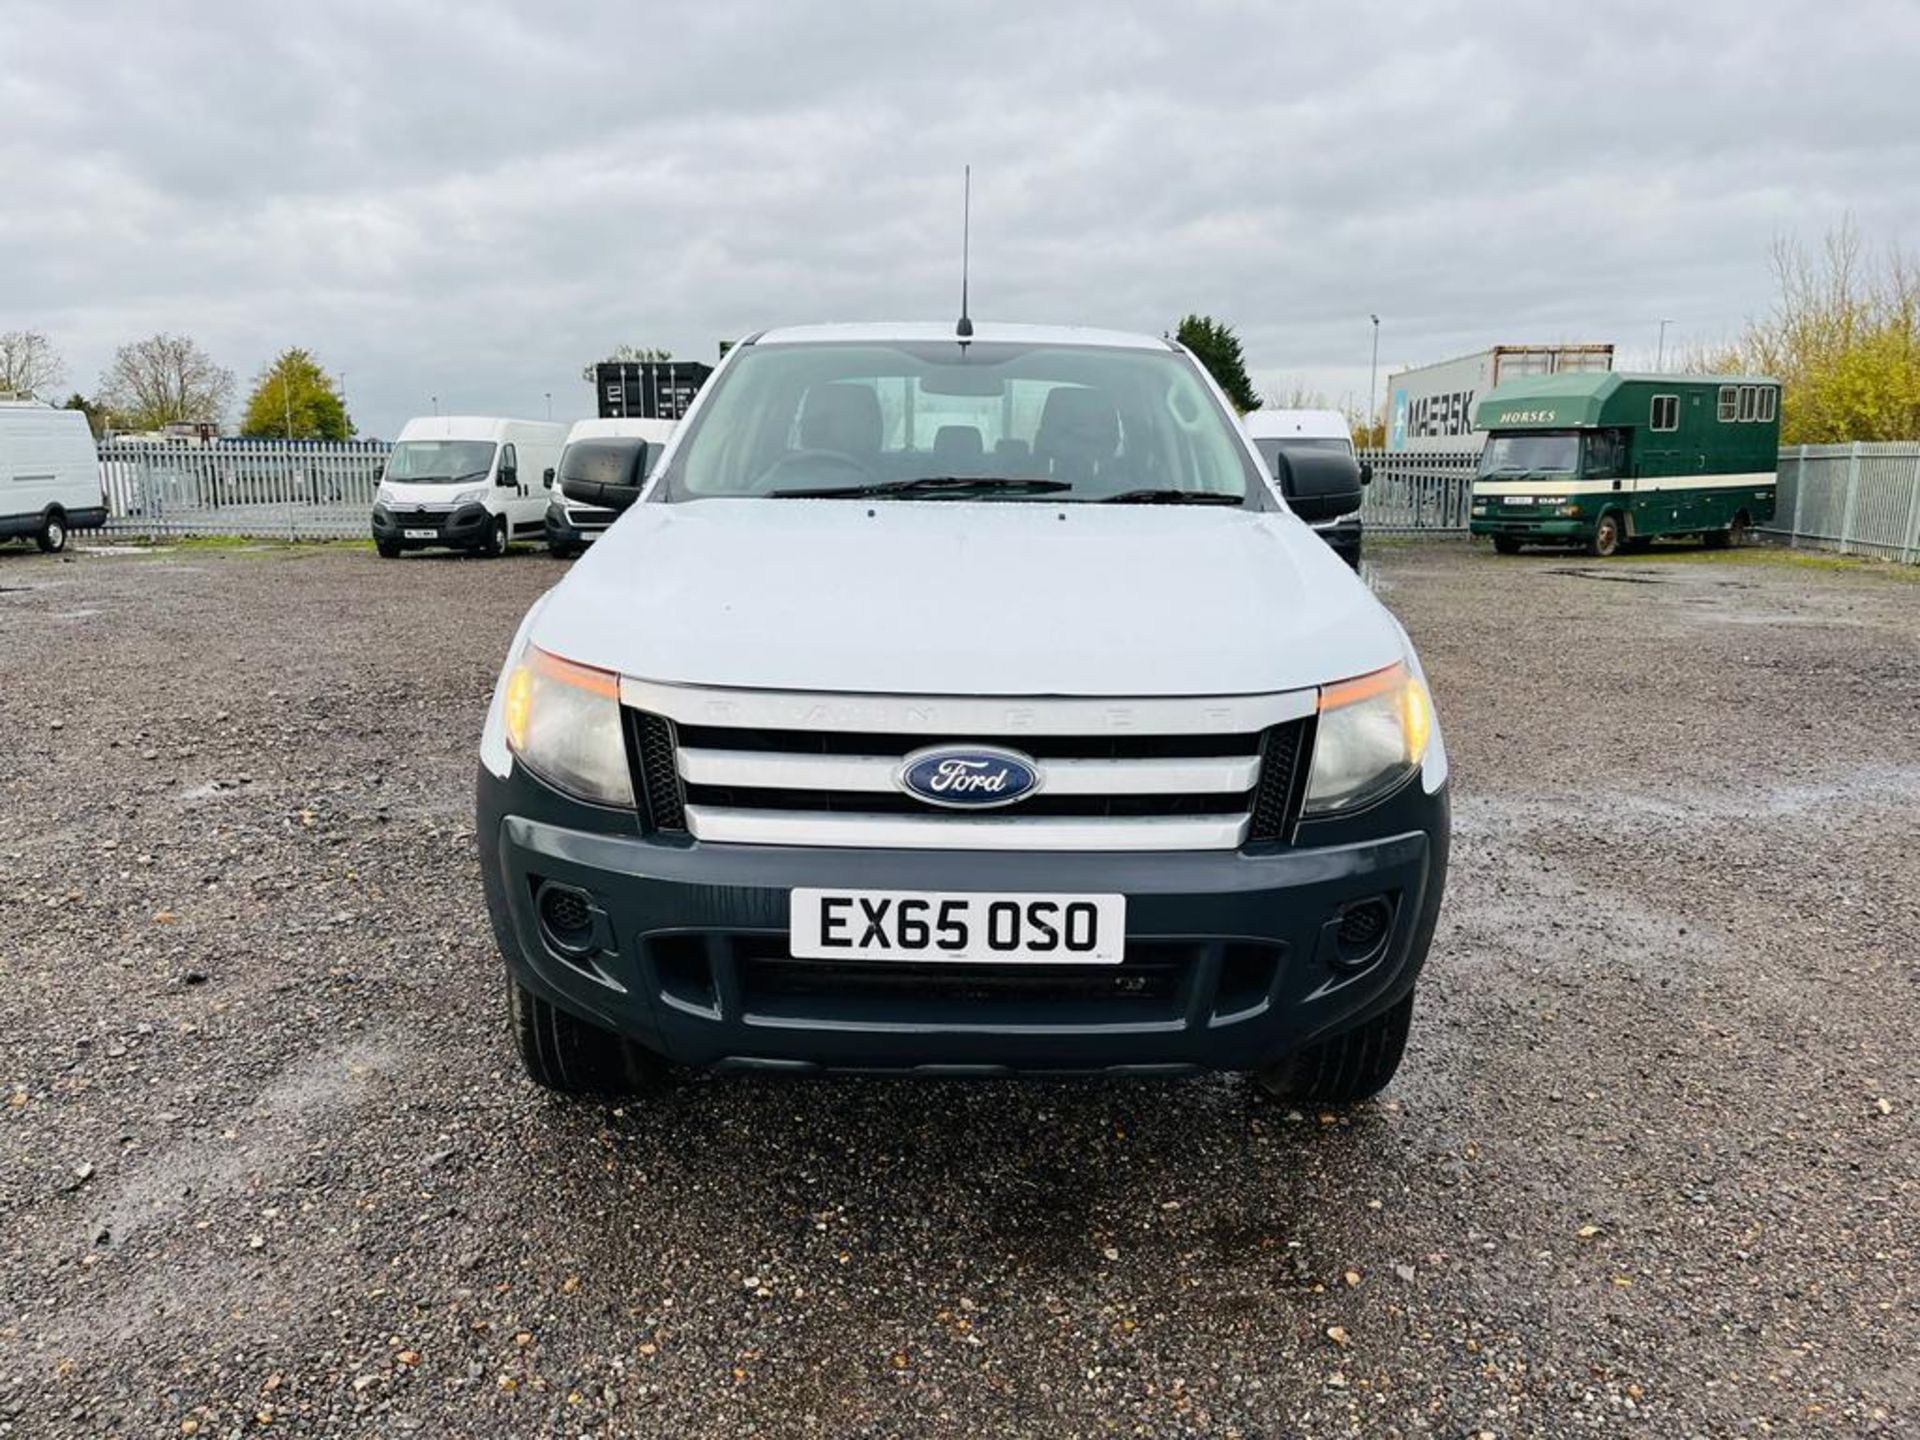 ** ON SALE ** Ford Ranger 2.2 TDCI XL 4WD 150 2015 '65 Reg' - A/C - 33,789 Miles Only - No Vat - Image 2 of 23